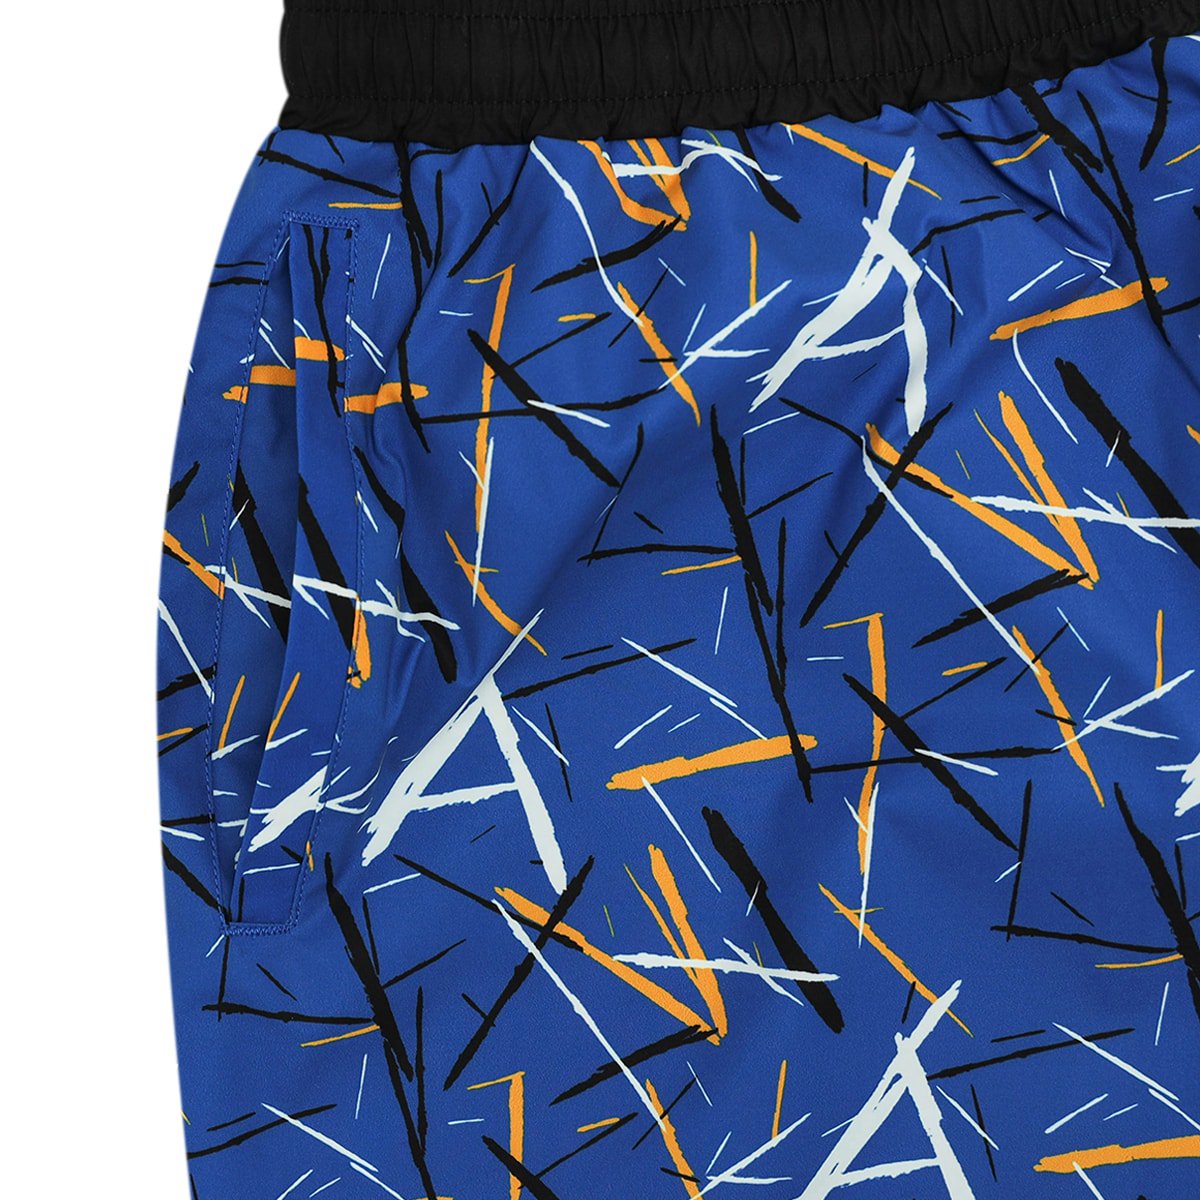 scratched shorts【blue】 - Arch ☆ アーチ [バスケットボール 